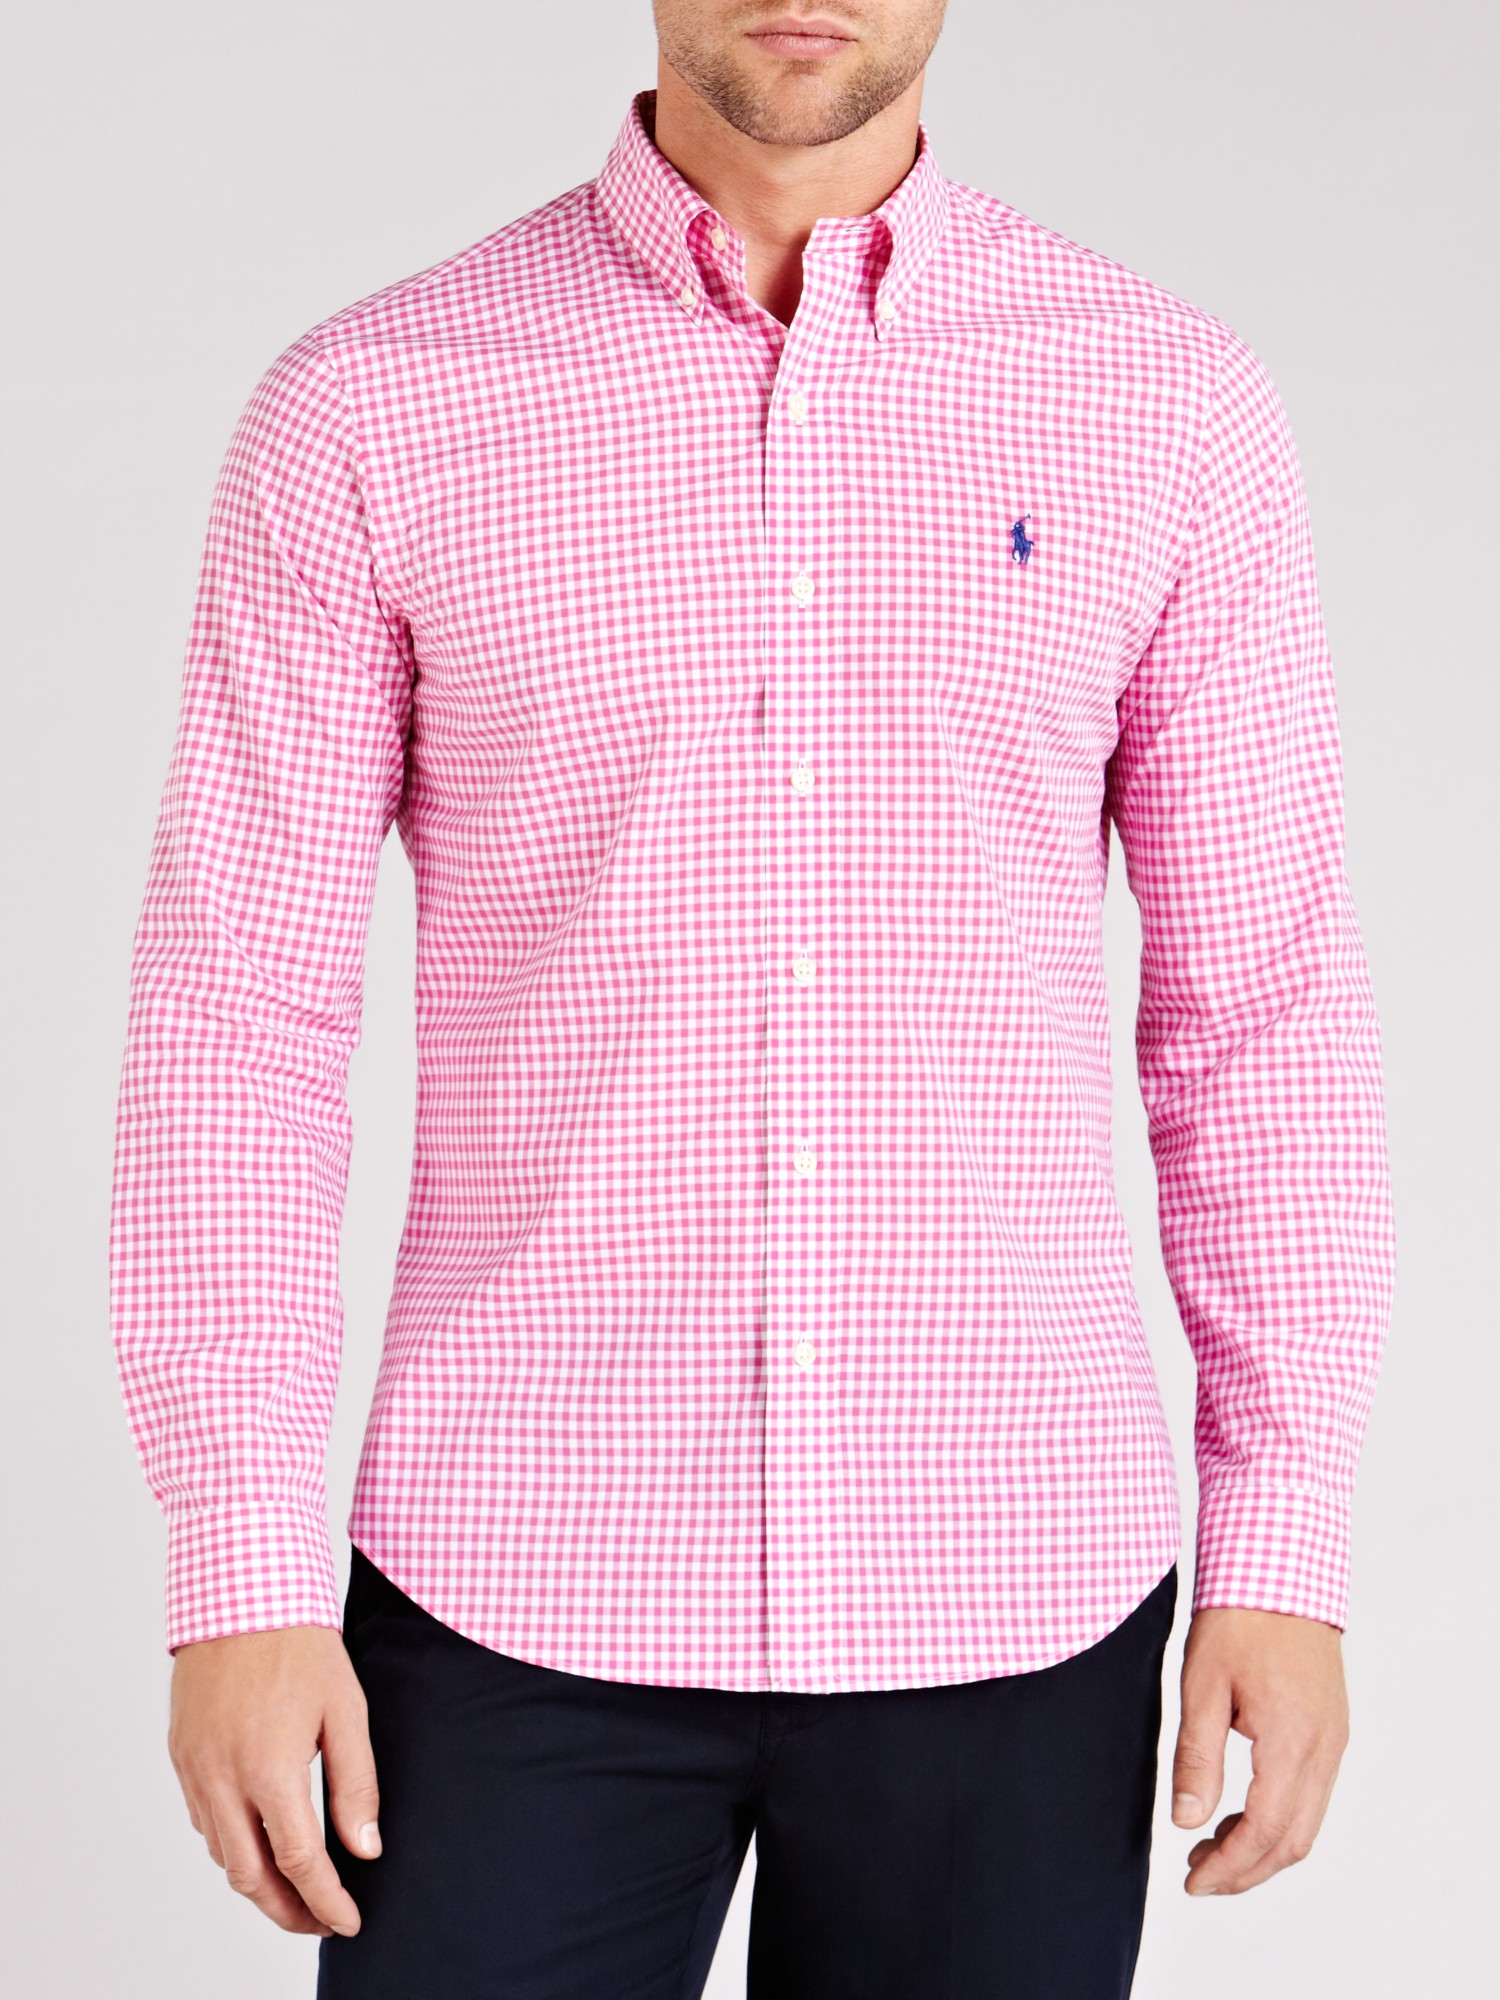 Polo Ralph Lauren Cotton Gingham Slim Fit Shirt in Pink for Men - Lyst